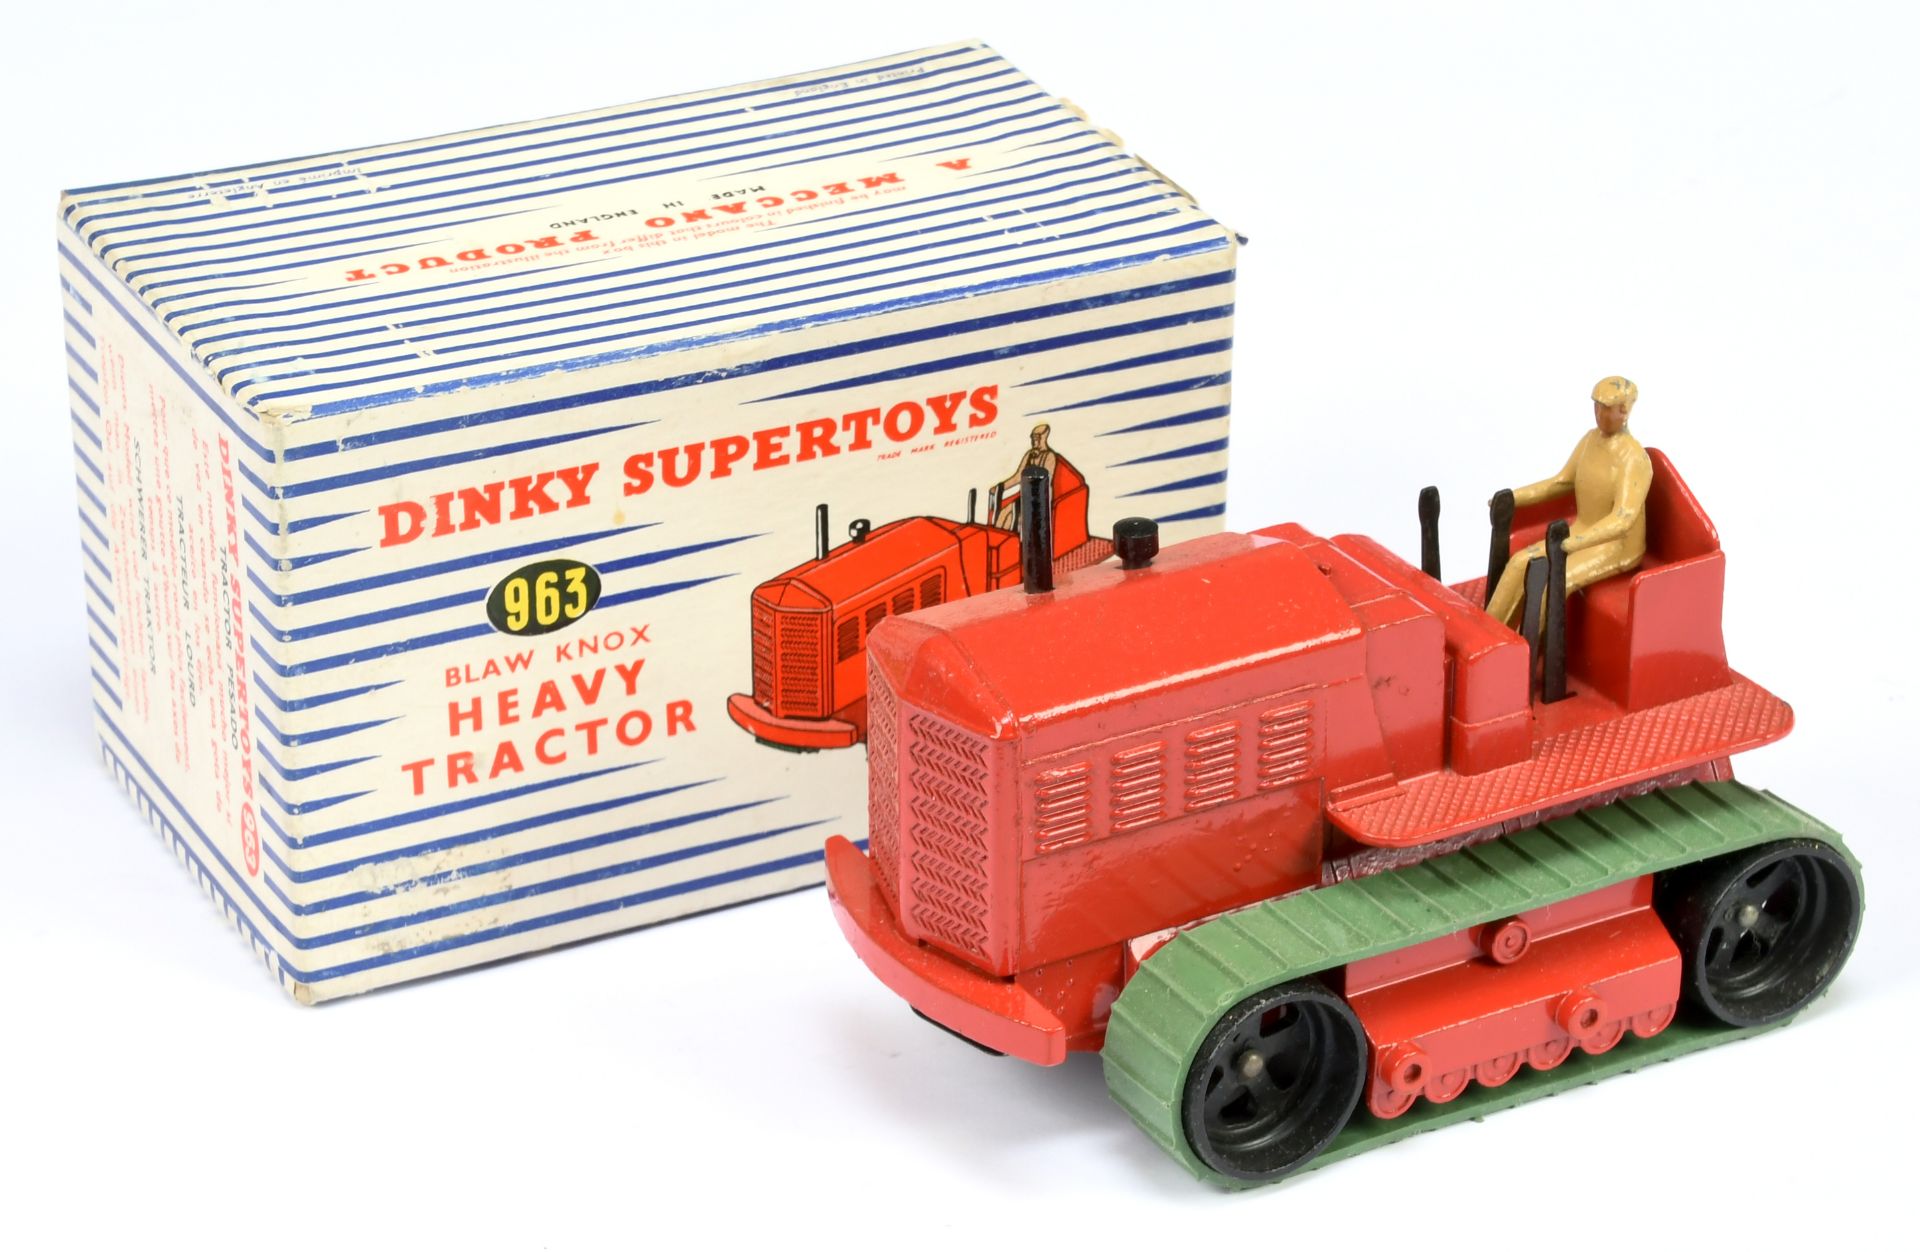 Dinky Toys 963 Blaw Knox Heavy Tractor - Red body, black metal rollers with green rubber tracks, ...